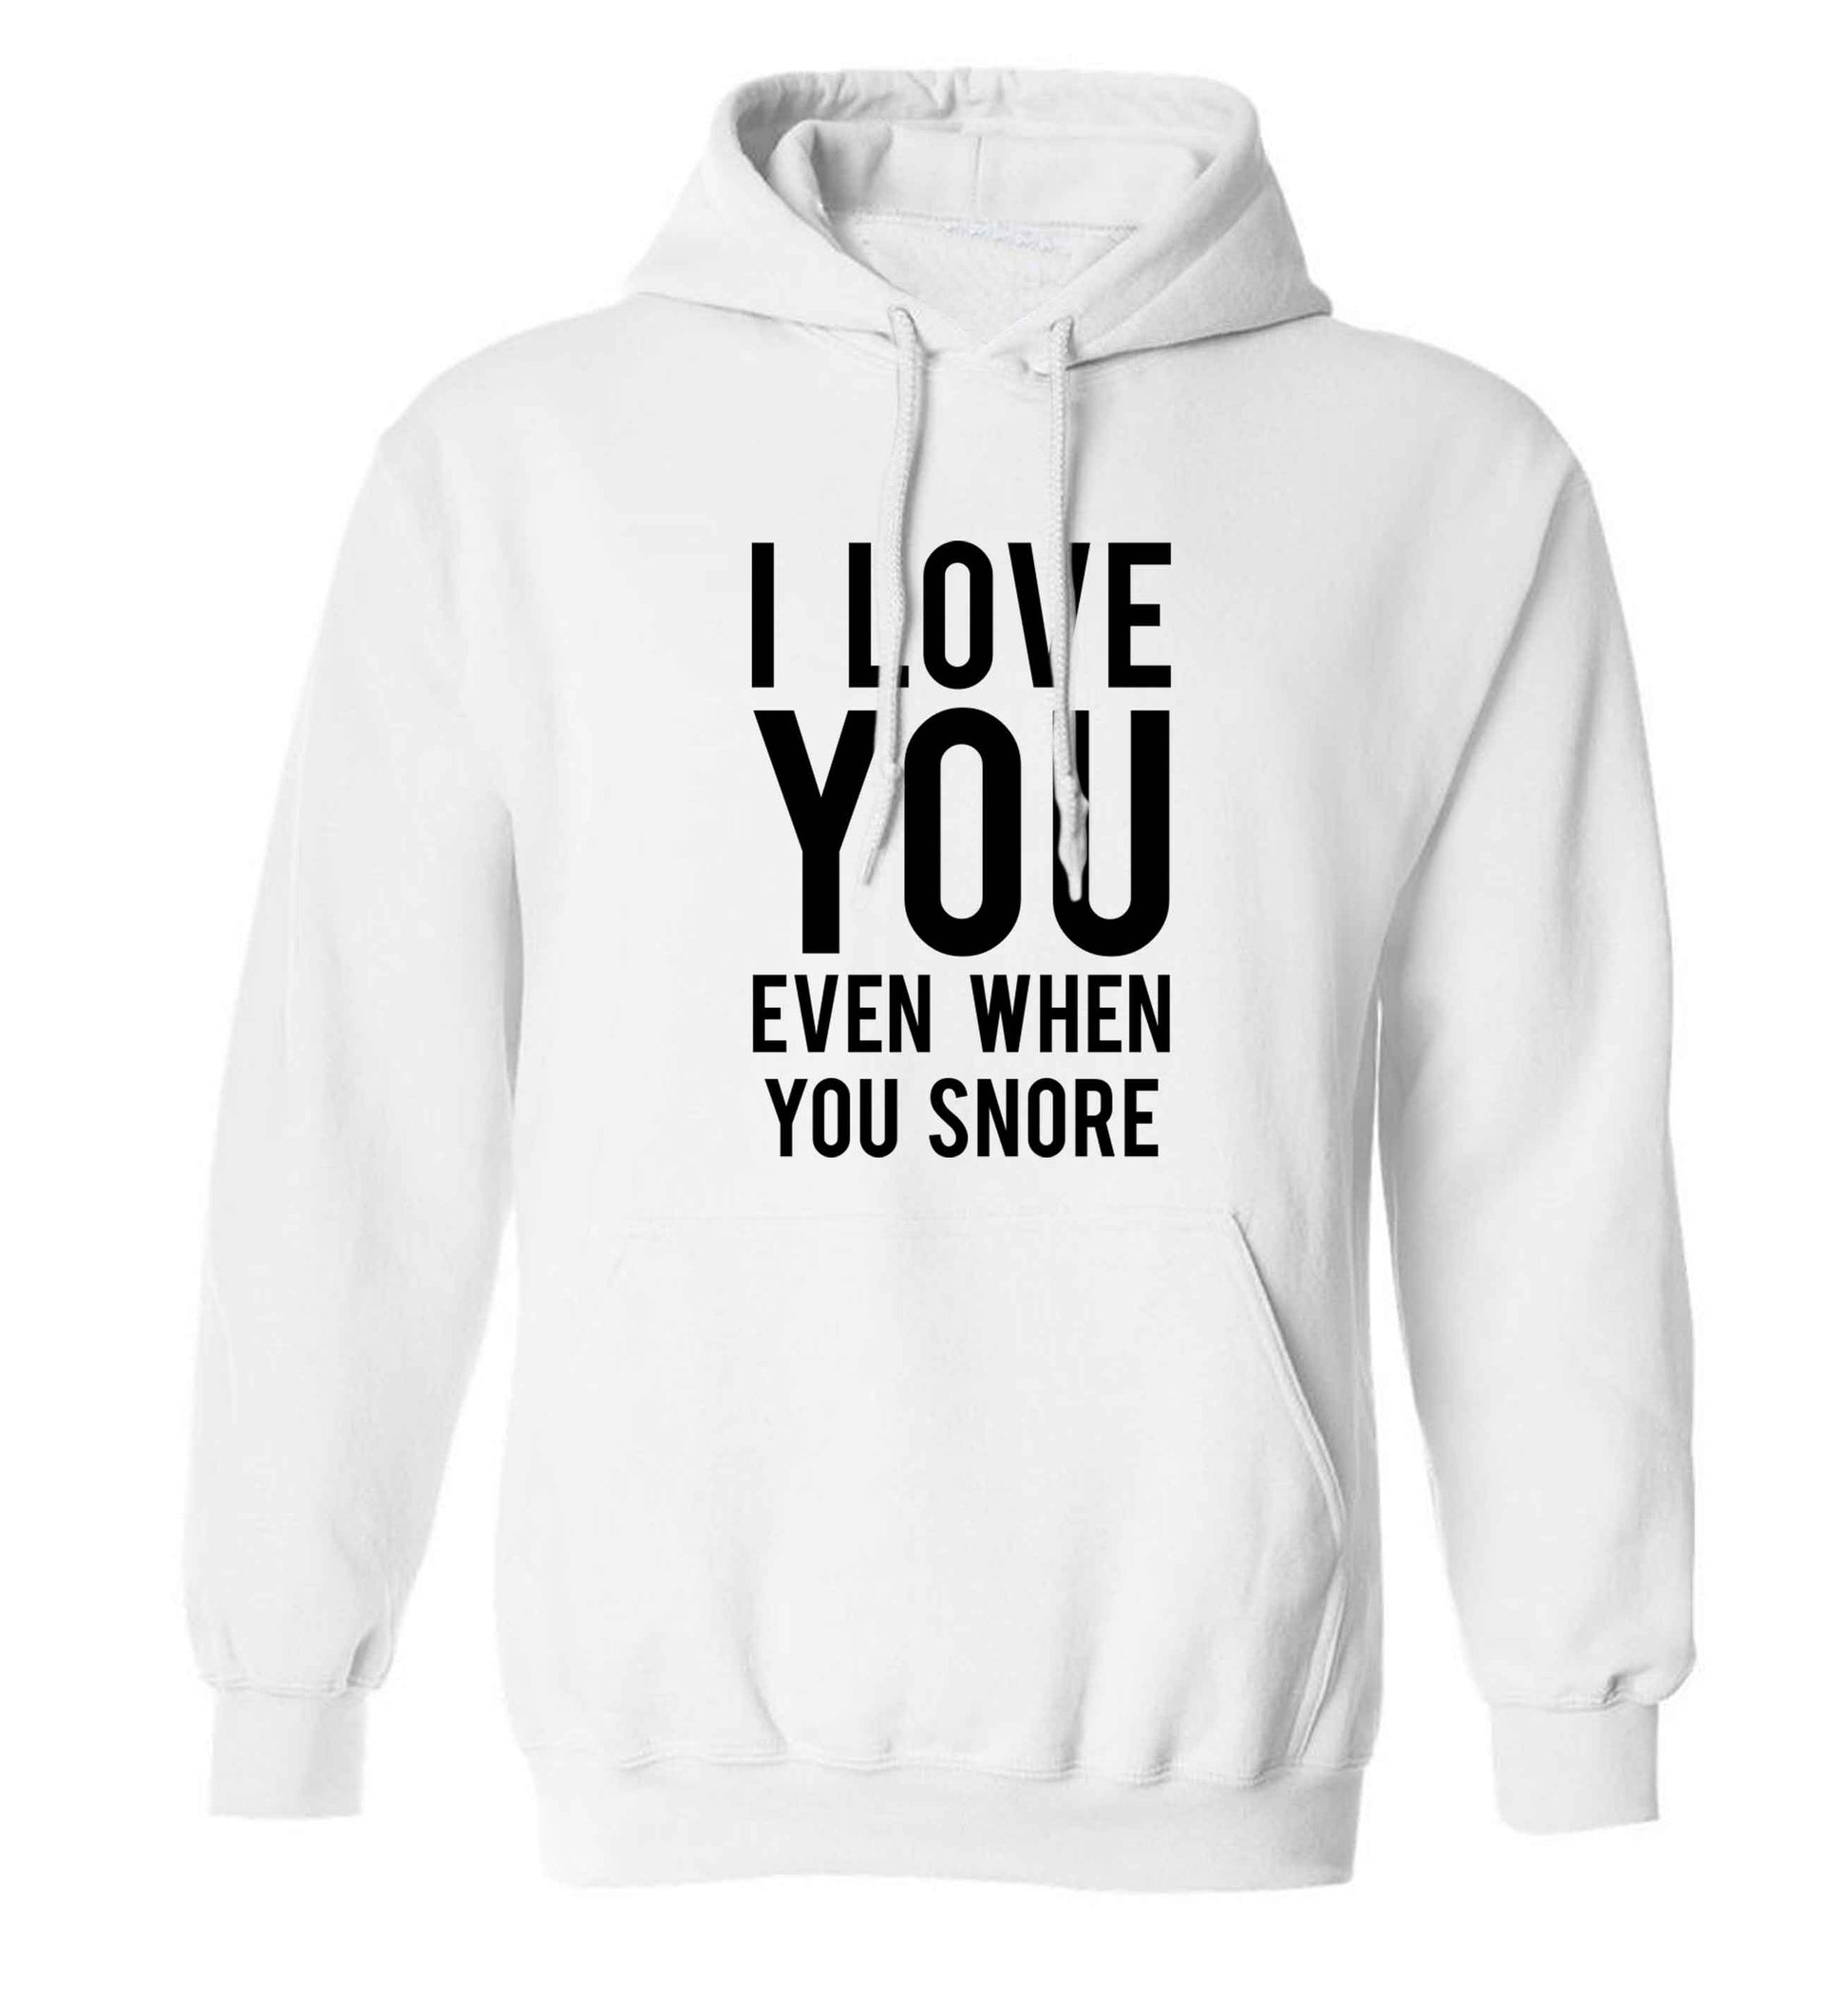 I love you even when you snore adults unisex white hoodie 2XL